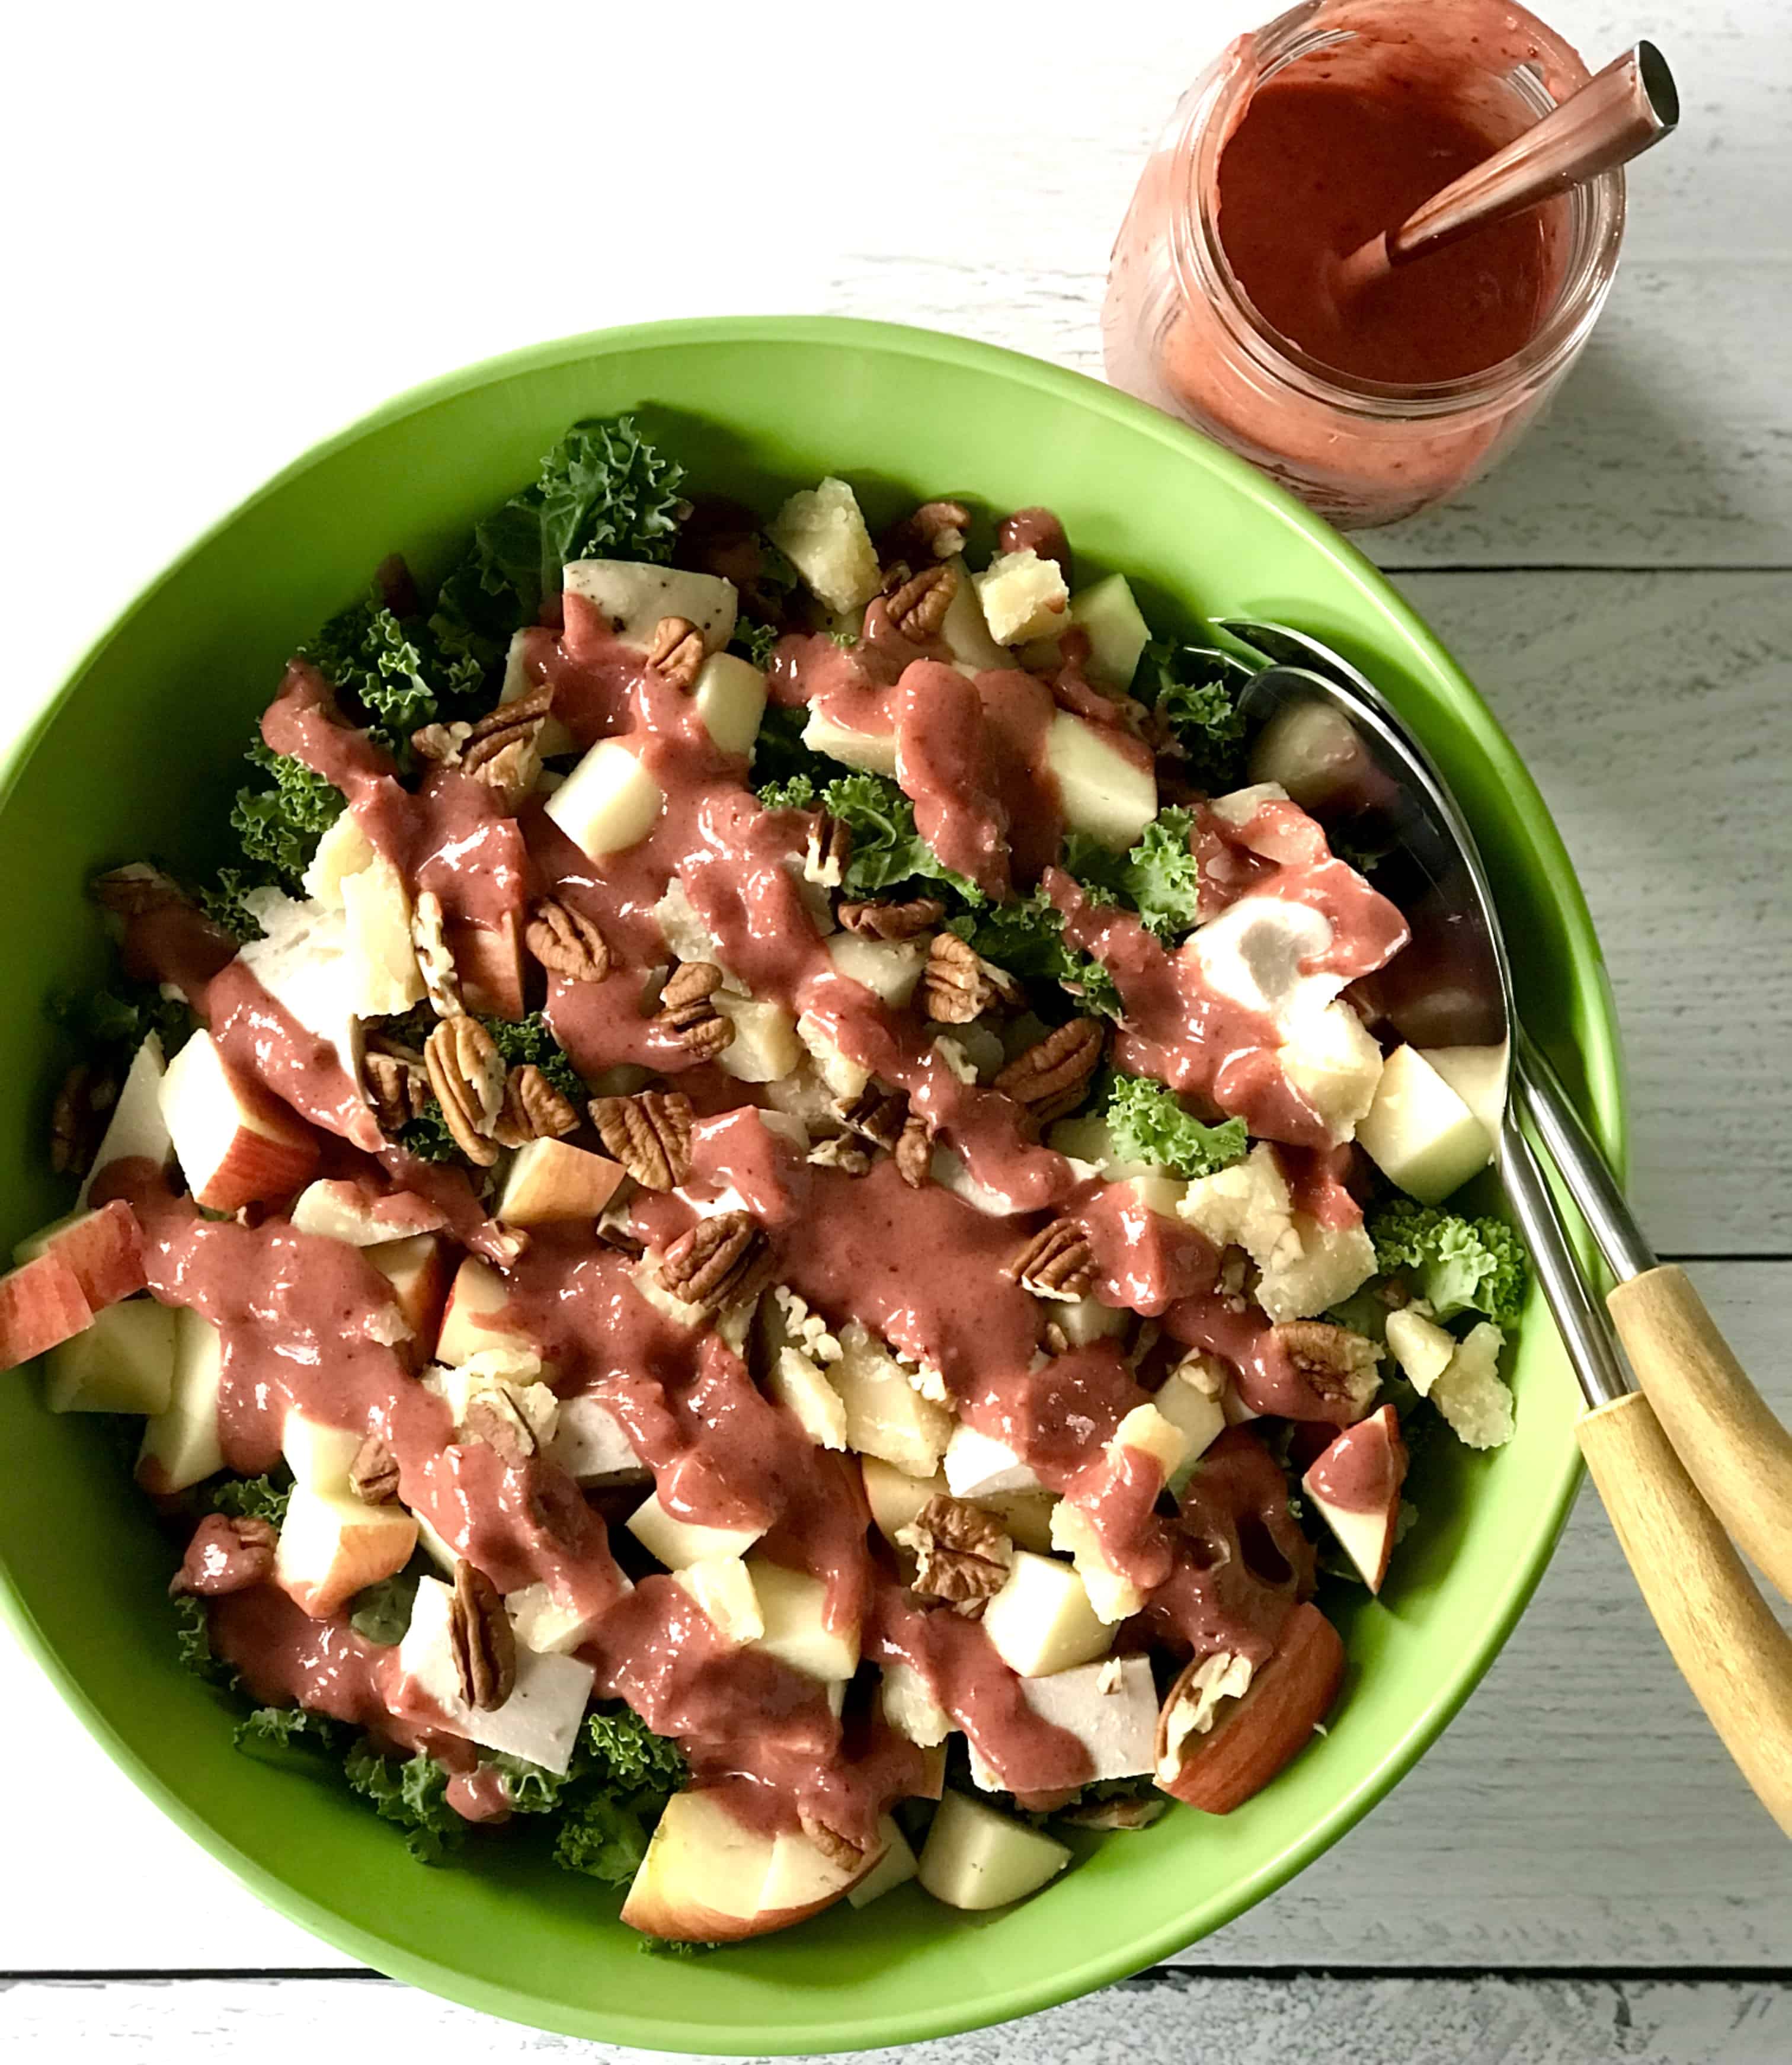 a salad in a bowl with kale, chicken, apples, pecans and Parmesan, topped with a cranberry dressing